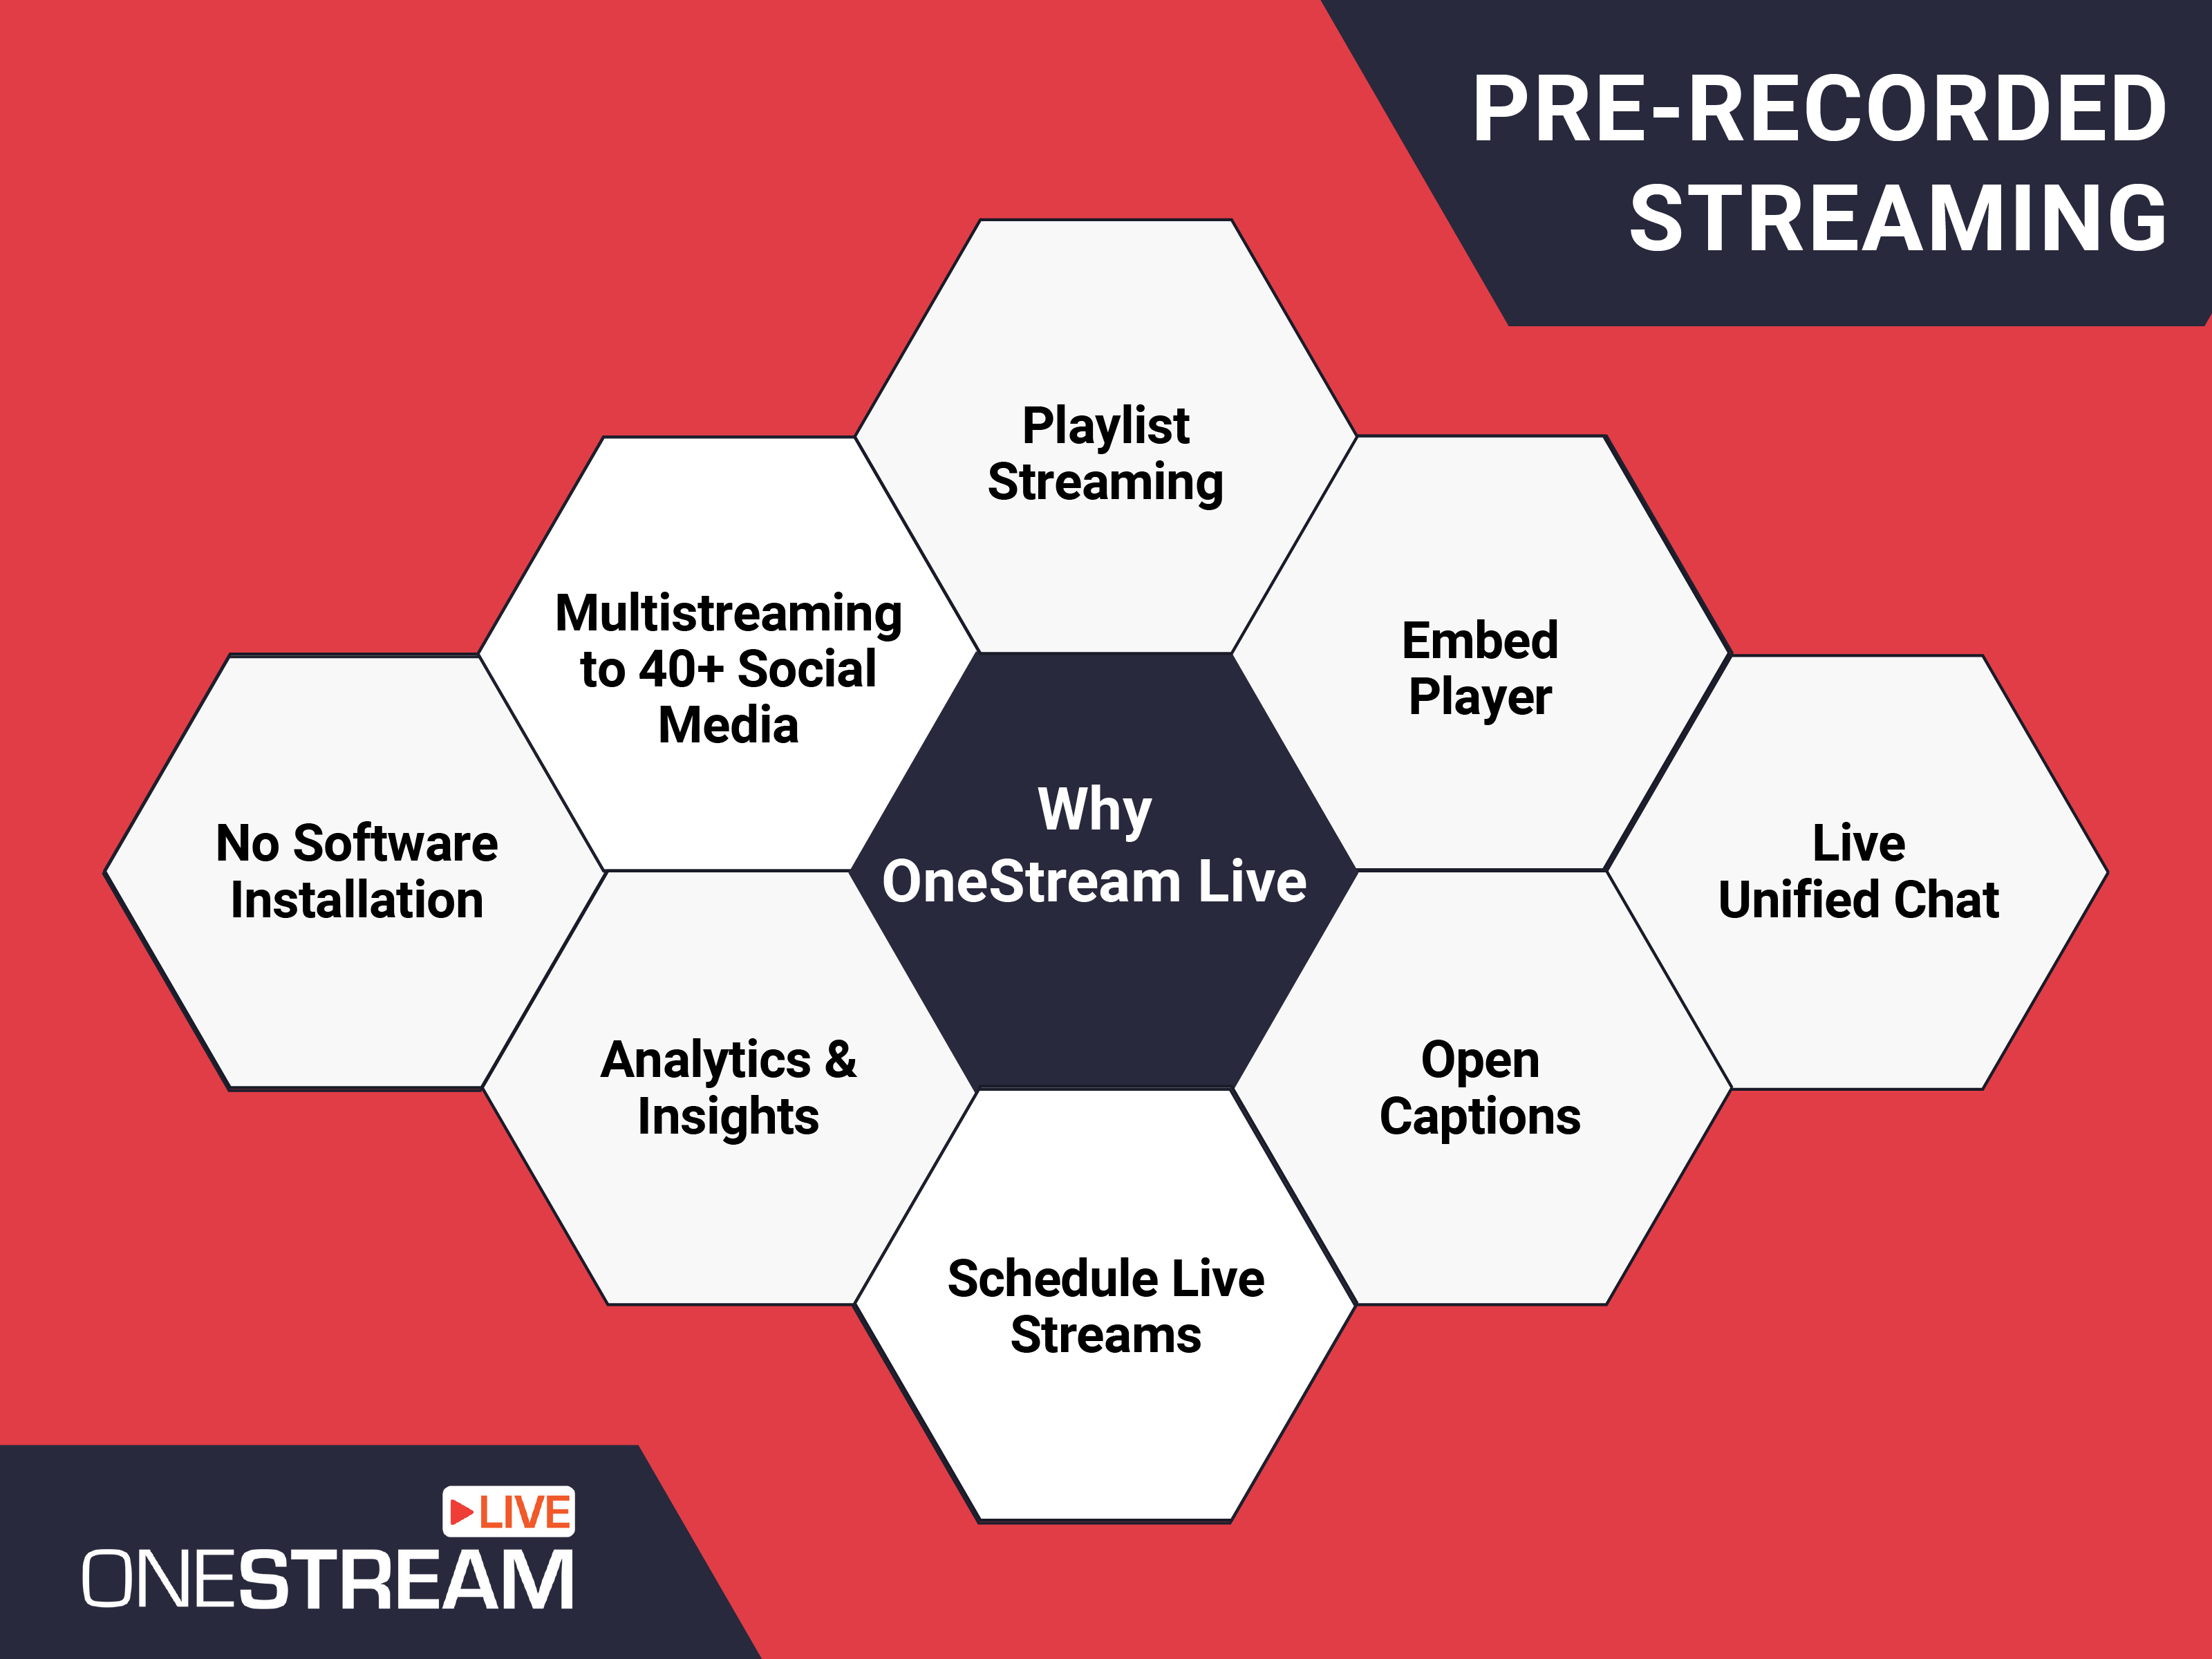 How to live stream pre-recorded videos with OneStream Live